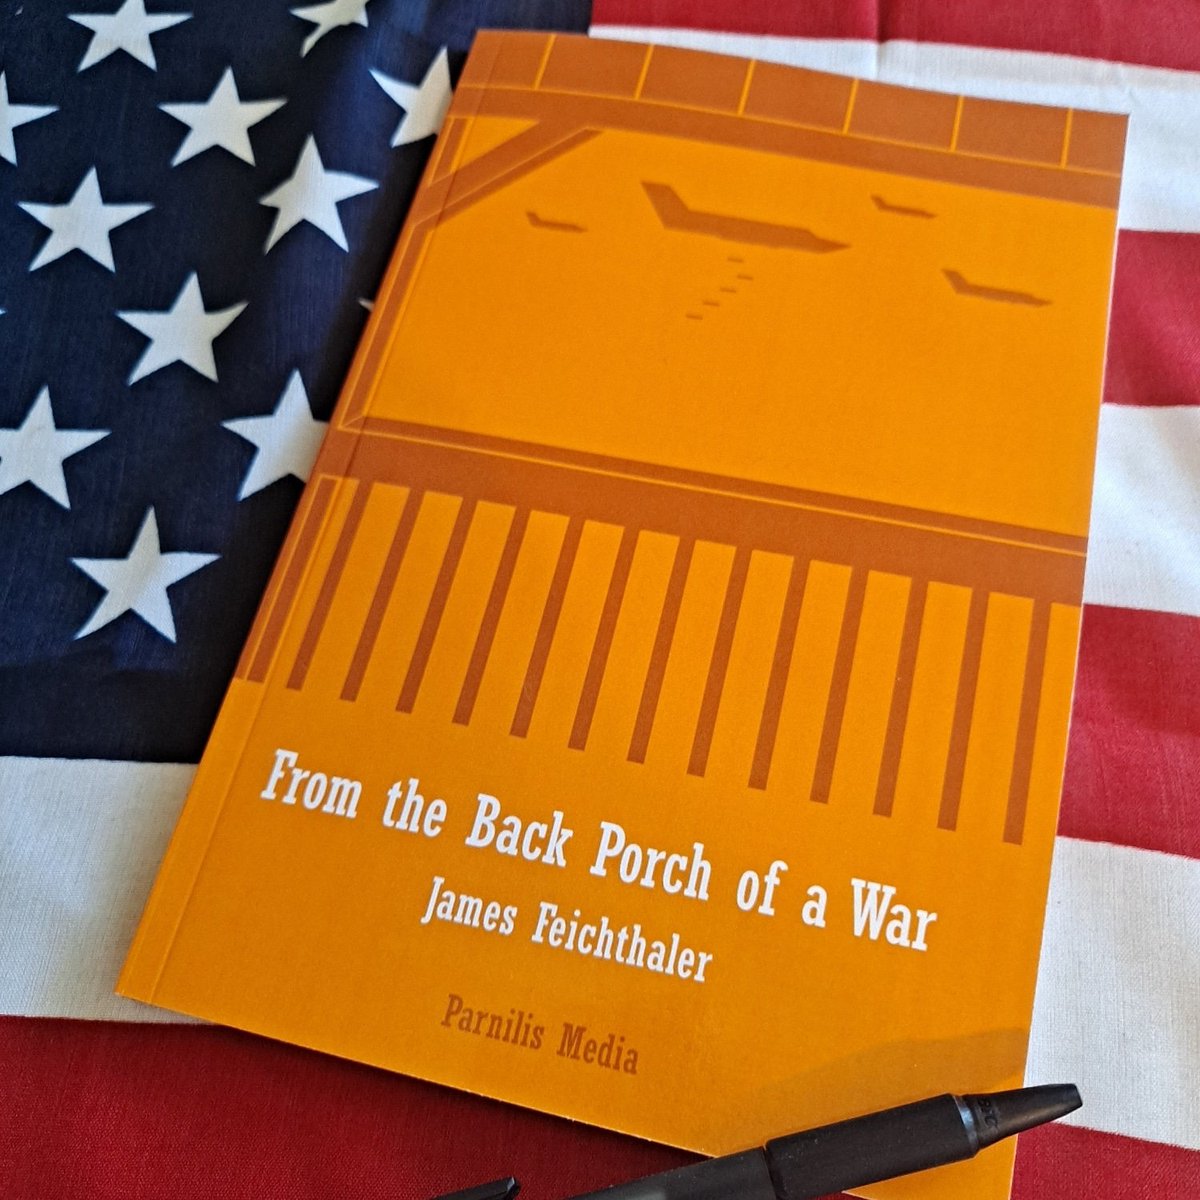 My new book is out! Check the blurb 👀 From the Back Porch of a War pulls no punches in its assessment of a politically-divided America seemingly at war with itself, searching for moral integrity in a hashtag-hardened, spiritually-bankrupt world.' #books #bookboost #author